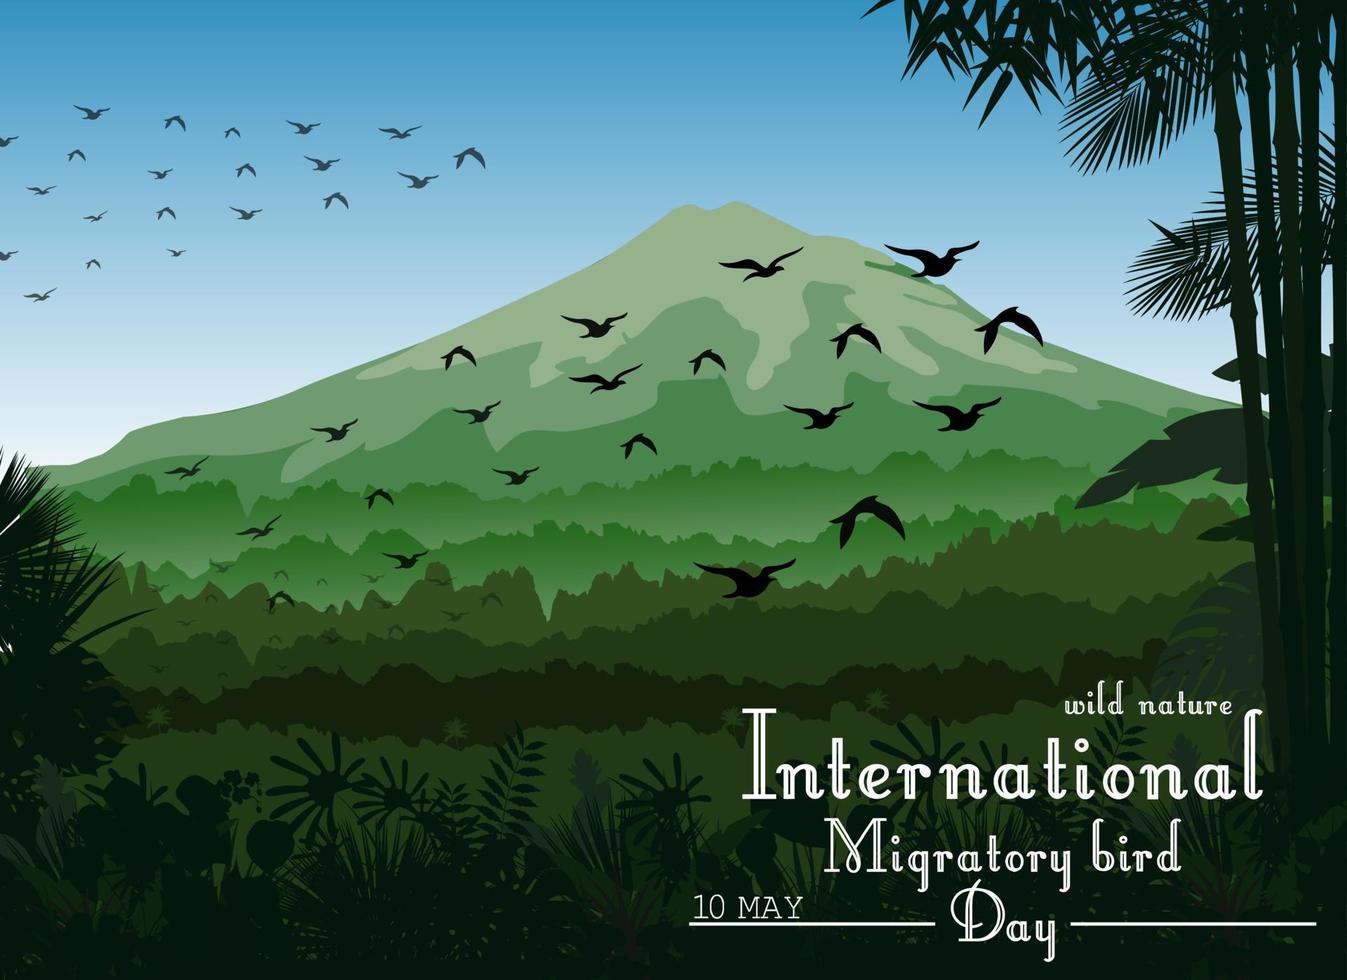 Mountains landscape of tropical background with flying birds for Birds migratory day vector